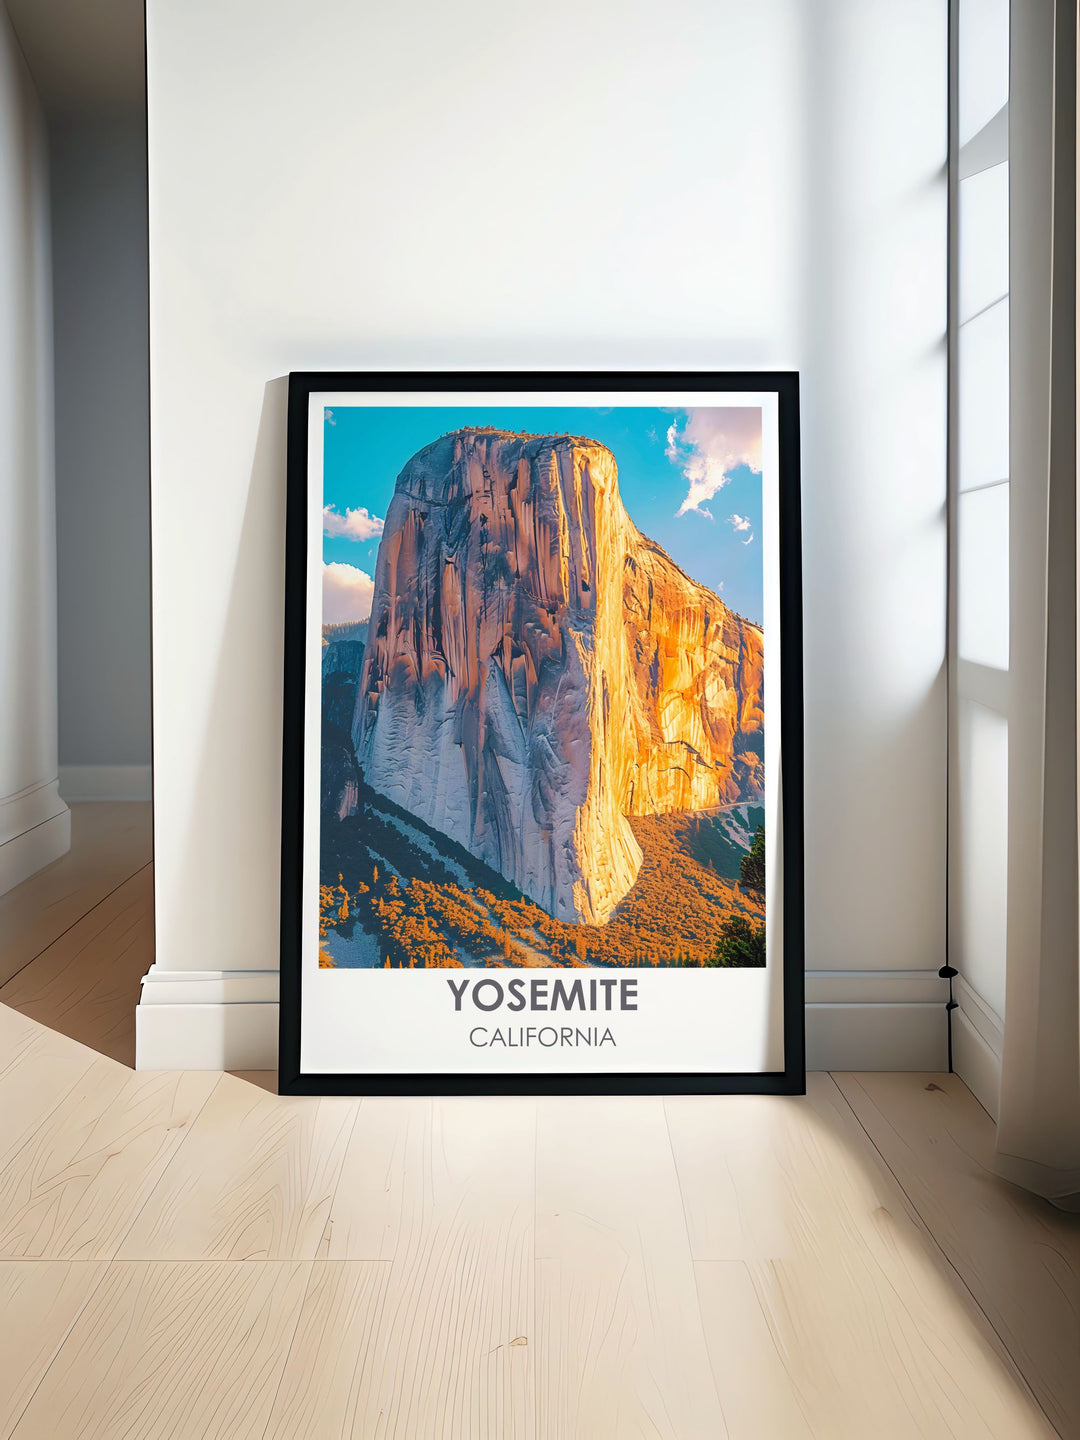 This Yosemite travel poster highlights the majestic El Capitan, a granite monolith renowned for its climbing routes and sheer size, capturing the essence of this iconic landmark against a stunning California landscape.